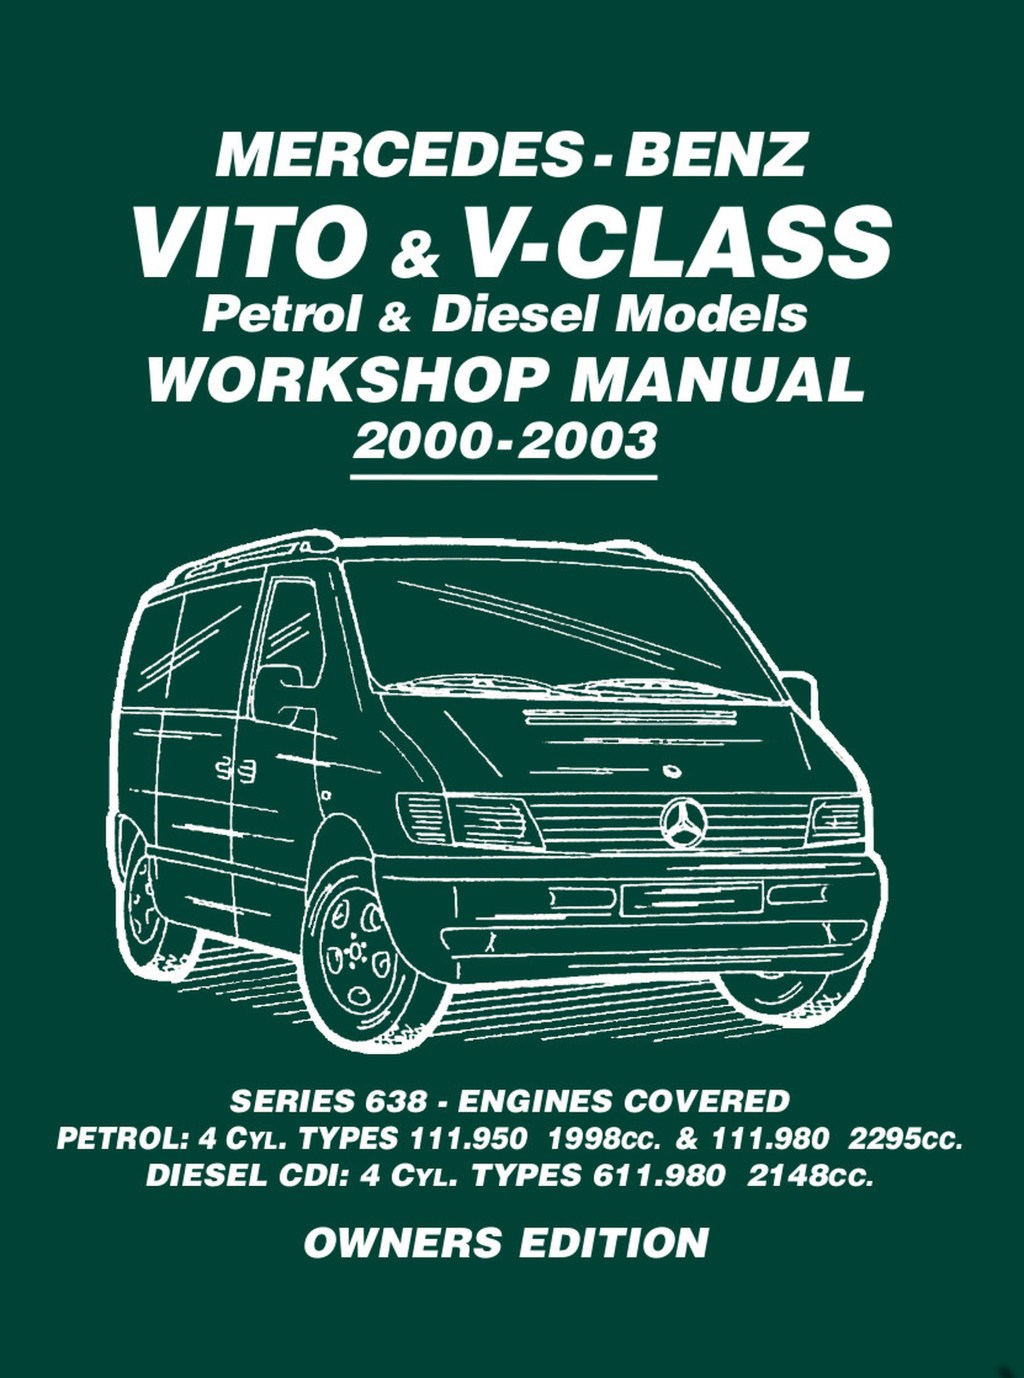 Picture of: Mercedes – Benz Vito & V-Class Petrol & Diesel Models